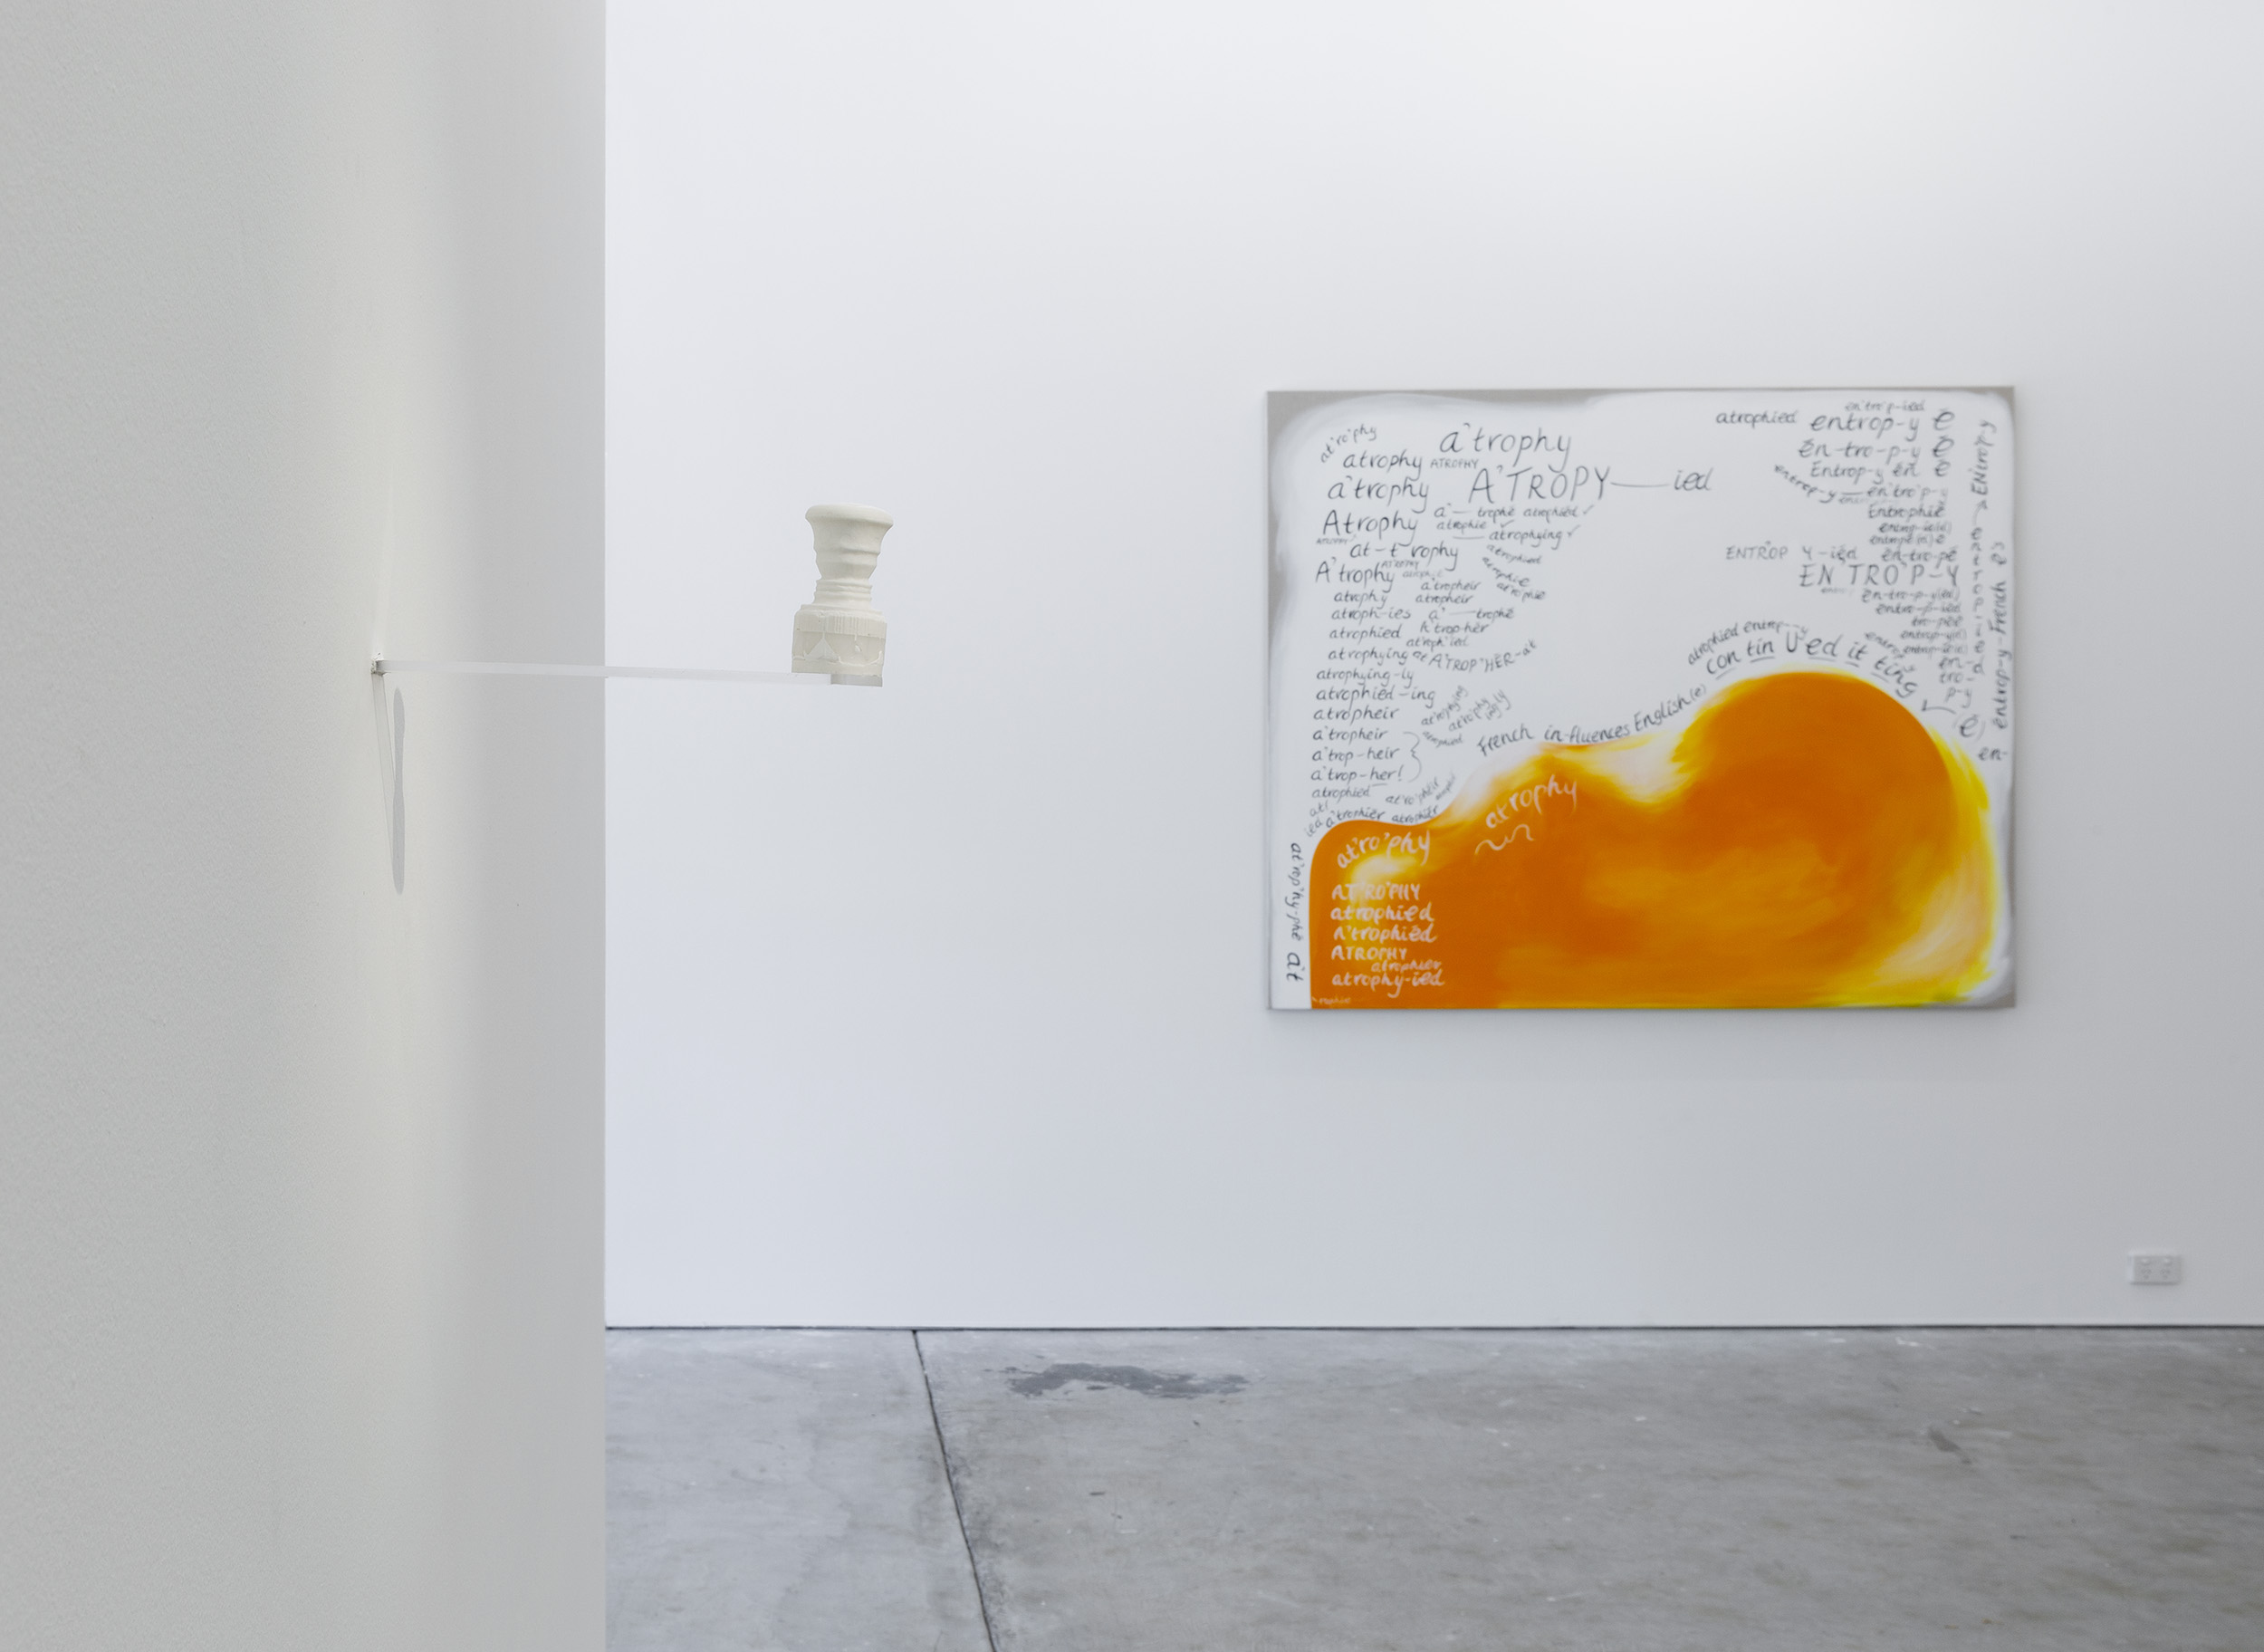 Installation view of Gertrude Studios 2021: If Not At Arm's Length, curated by Tim Riley Walsh, featuring work by Catherine Bell and Darcey Bella Arnold at Gertrude Contemporary.  Photo: Christian Capurro. 